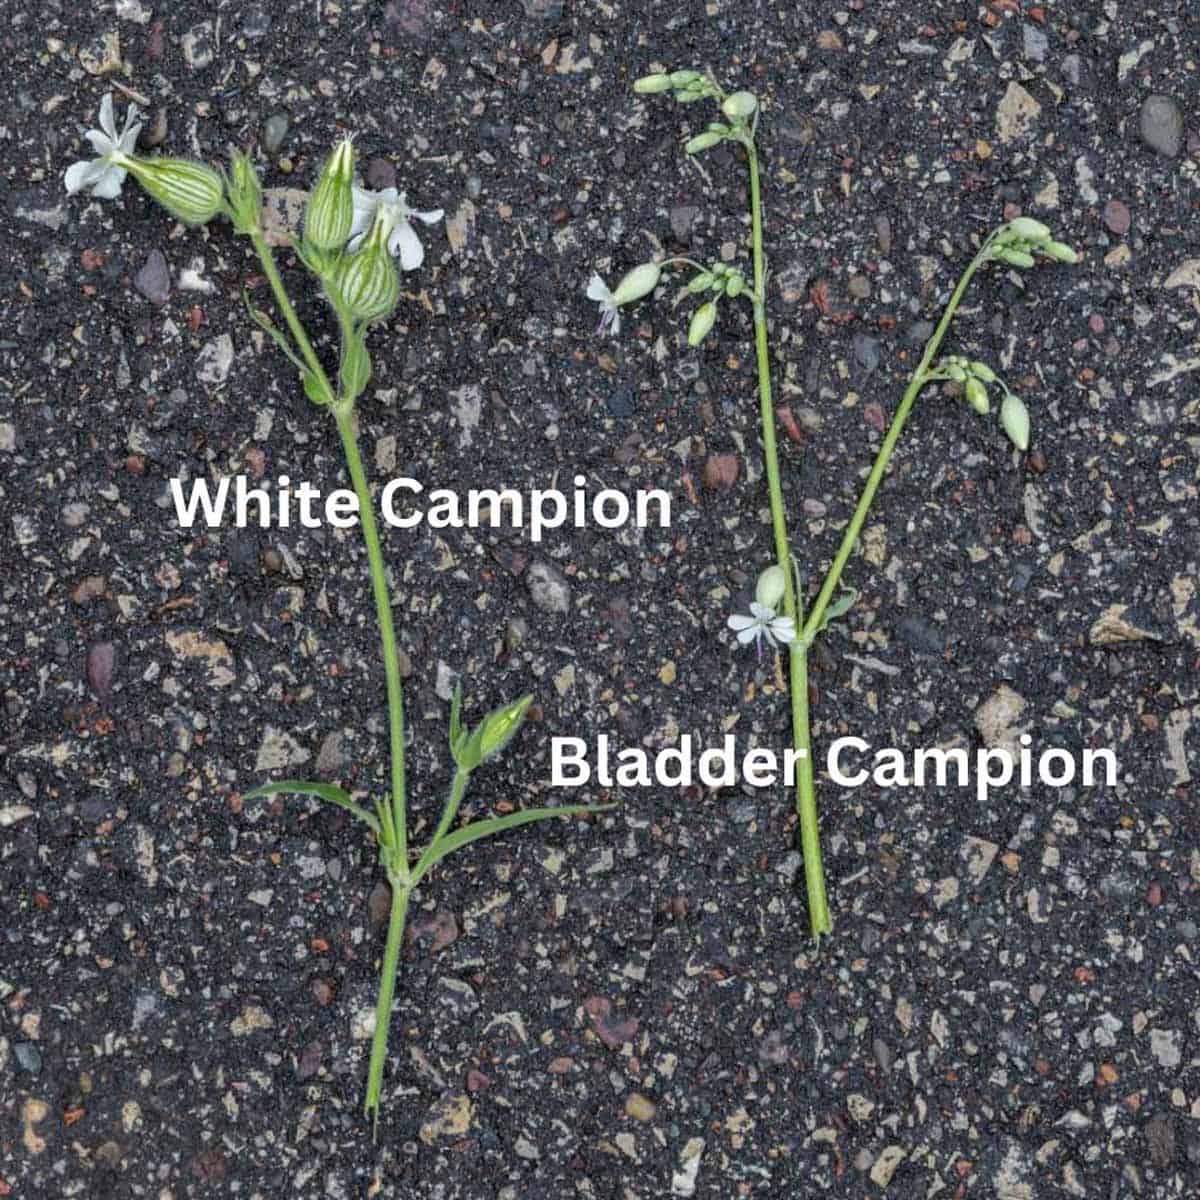 white campion laid next to bladder campion for identification